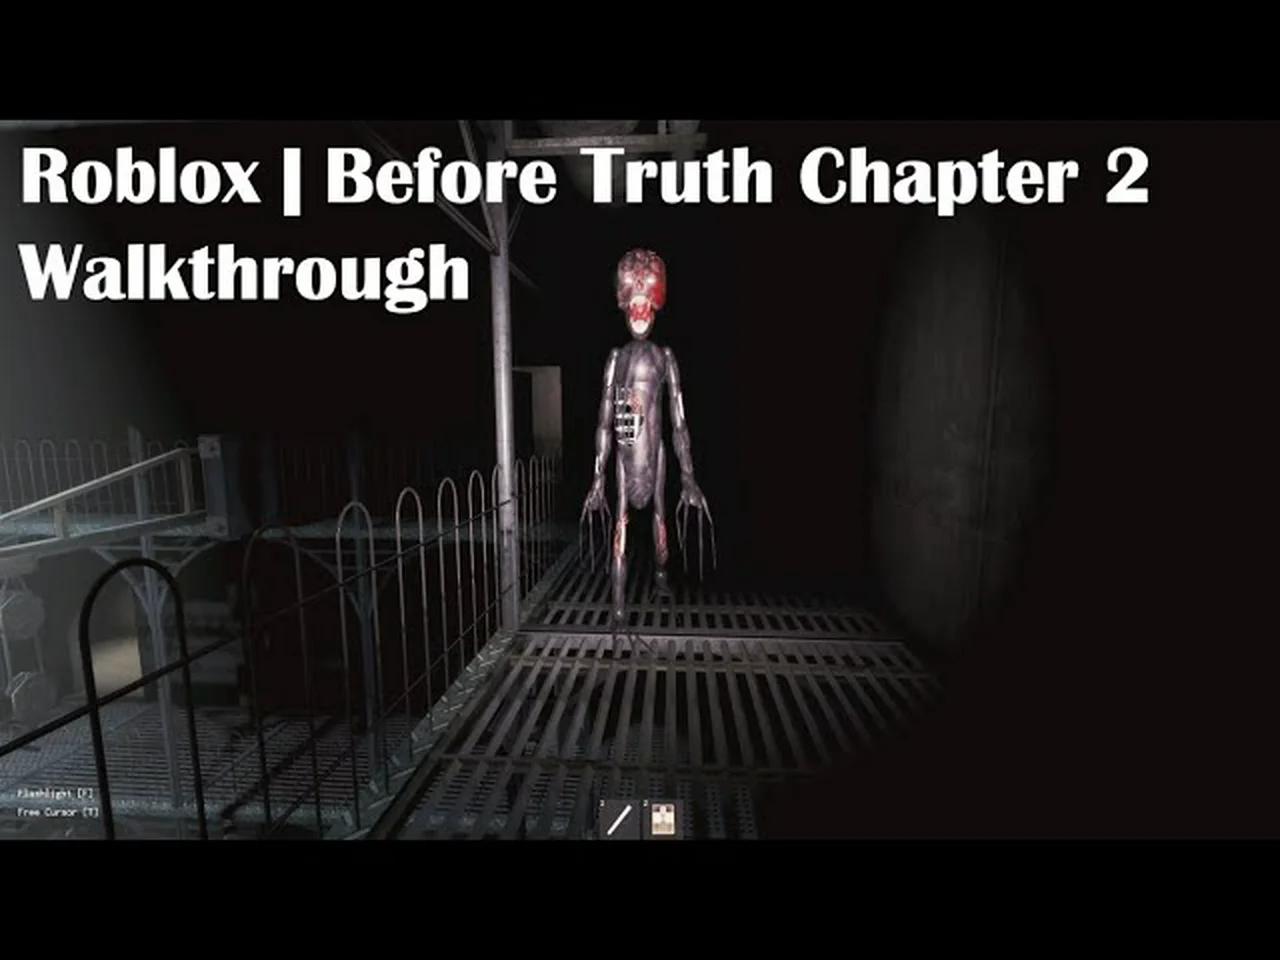 Before Truth All Codes Chapter 1 - Roblox 